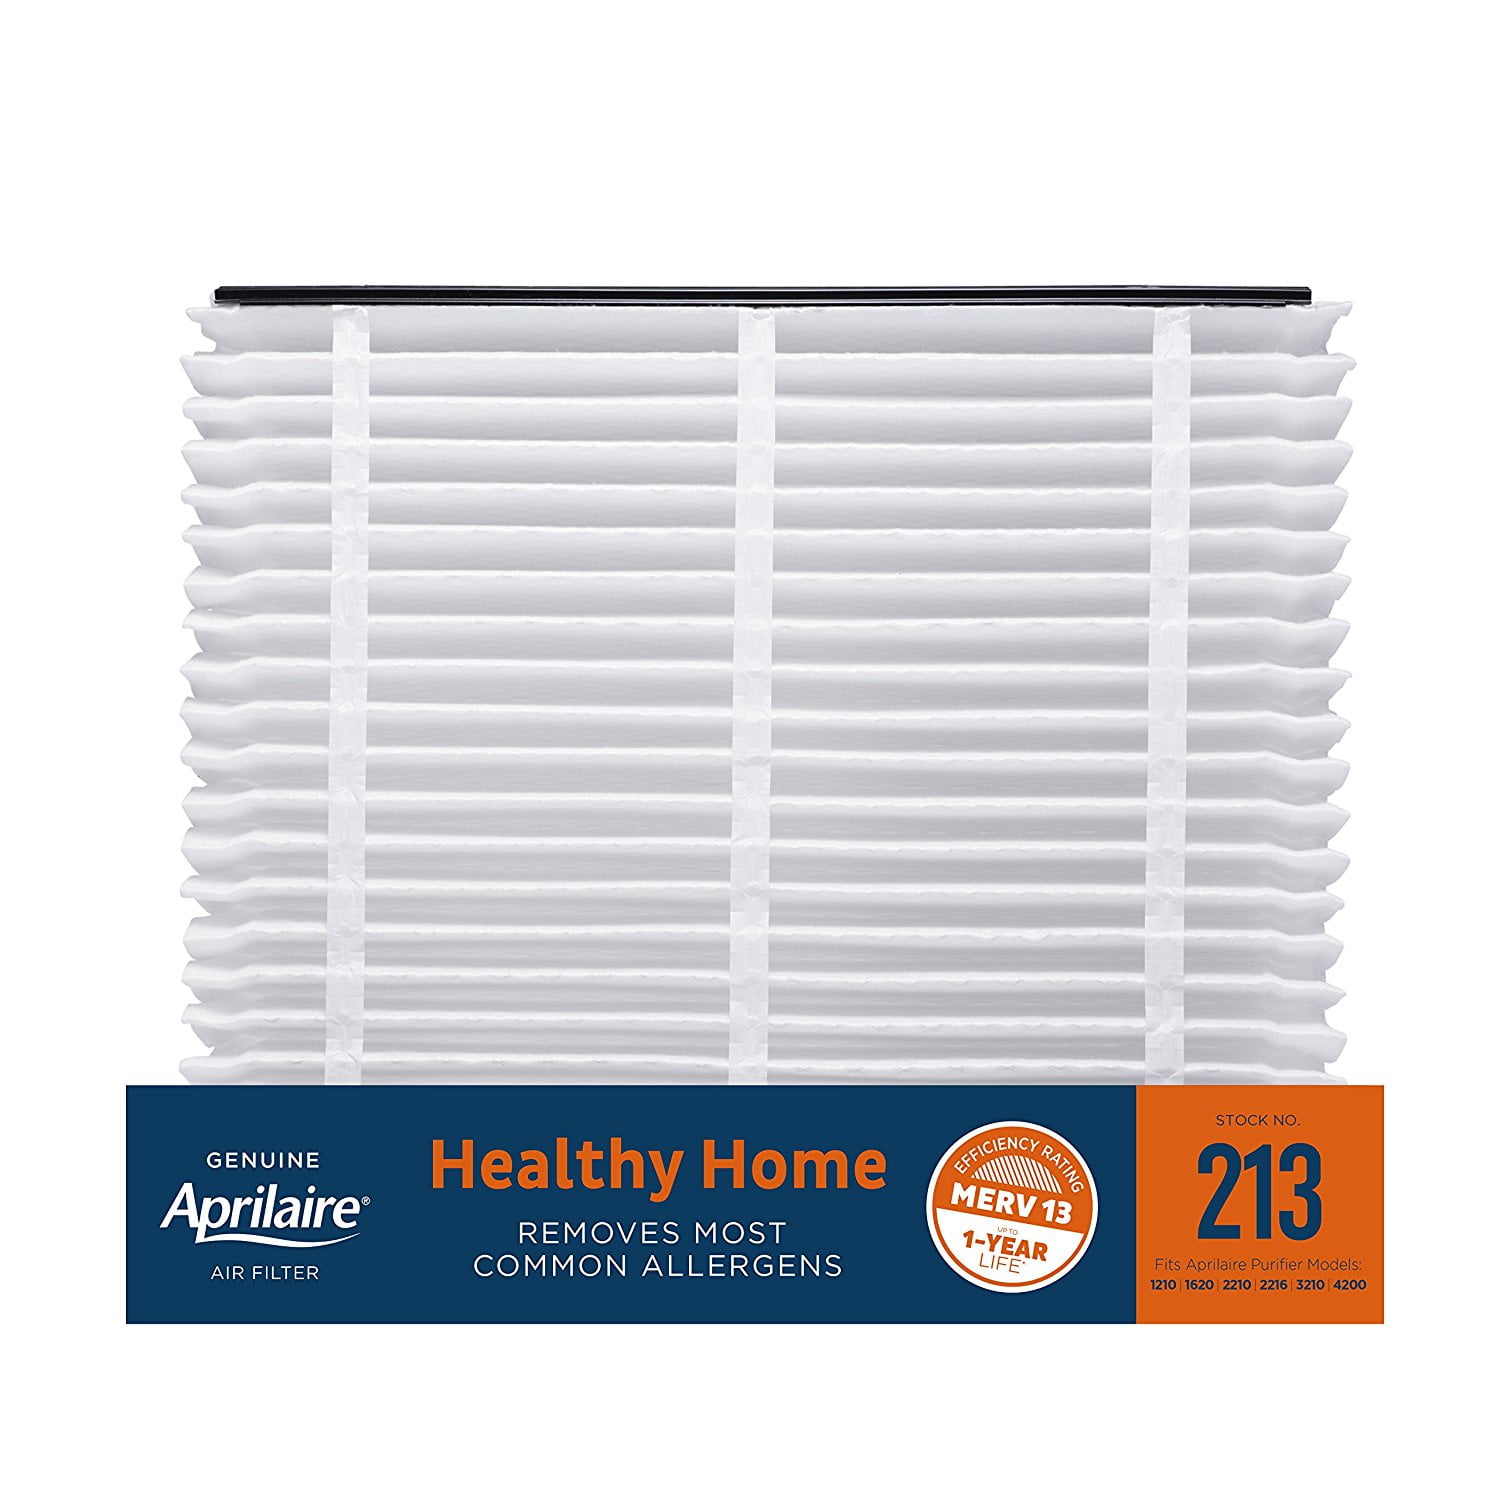 Aprilaire Healthy Home Allergy Filter Pack of 8 MERV 13 213 A8 213 Replacement Air Filter for Whole Home Air Purifiers